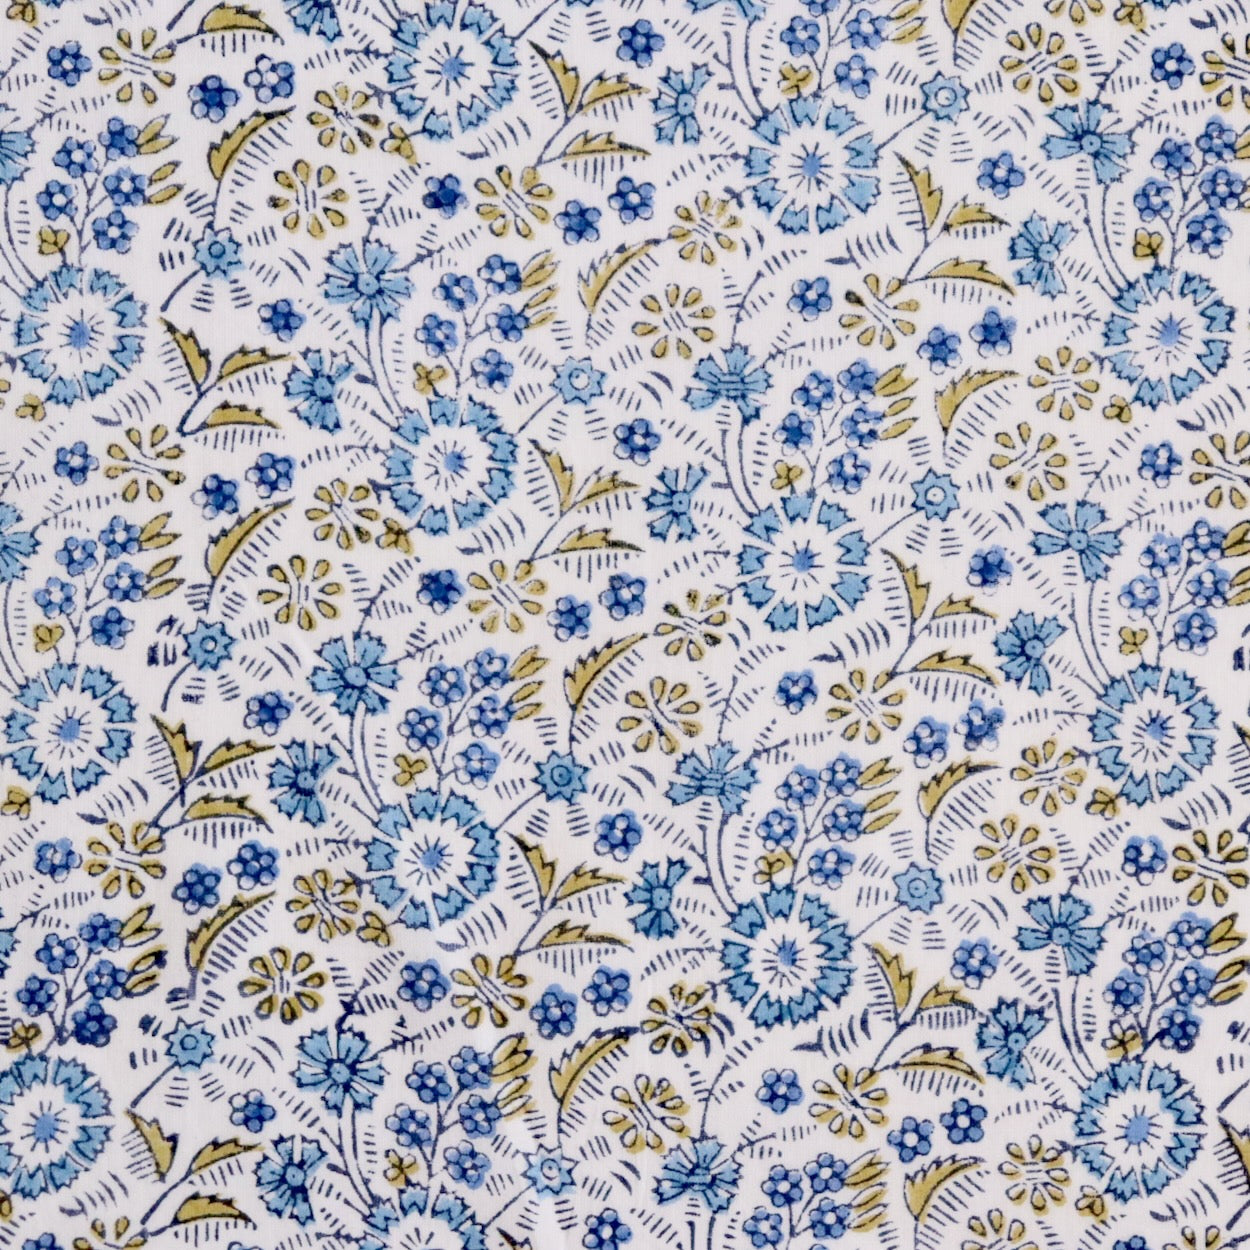 retro style small blue and white floral block print cotton fabric for quilting and dressmaking